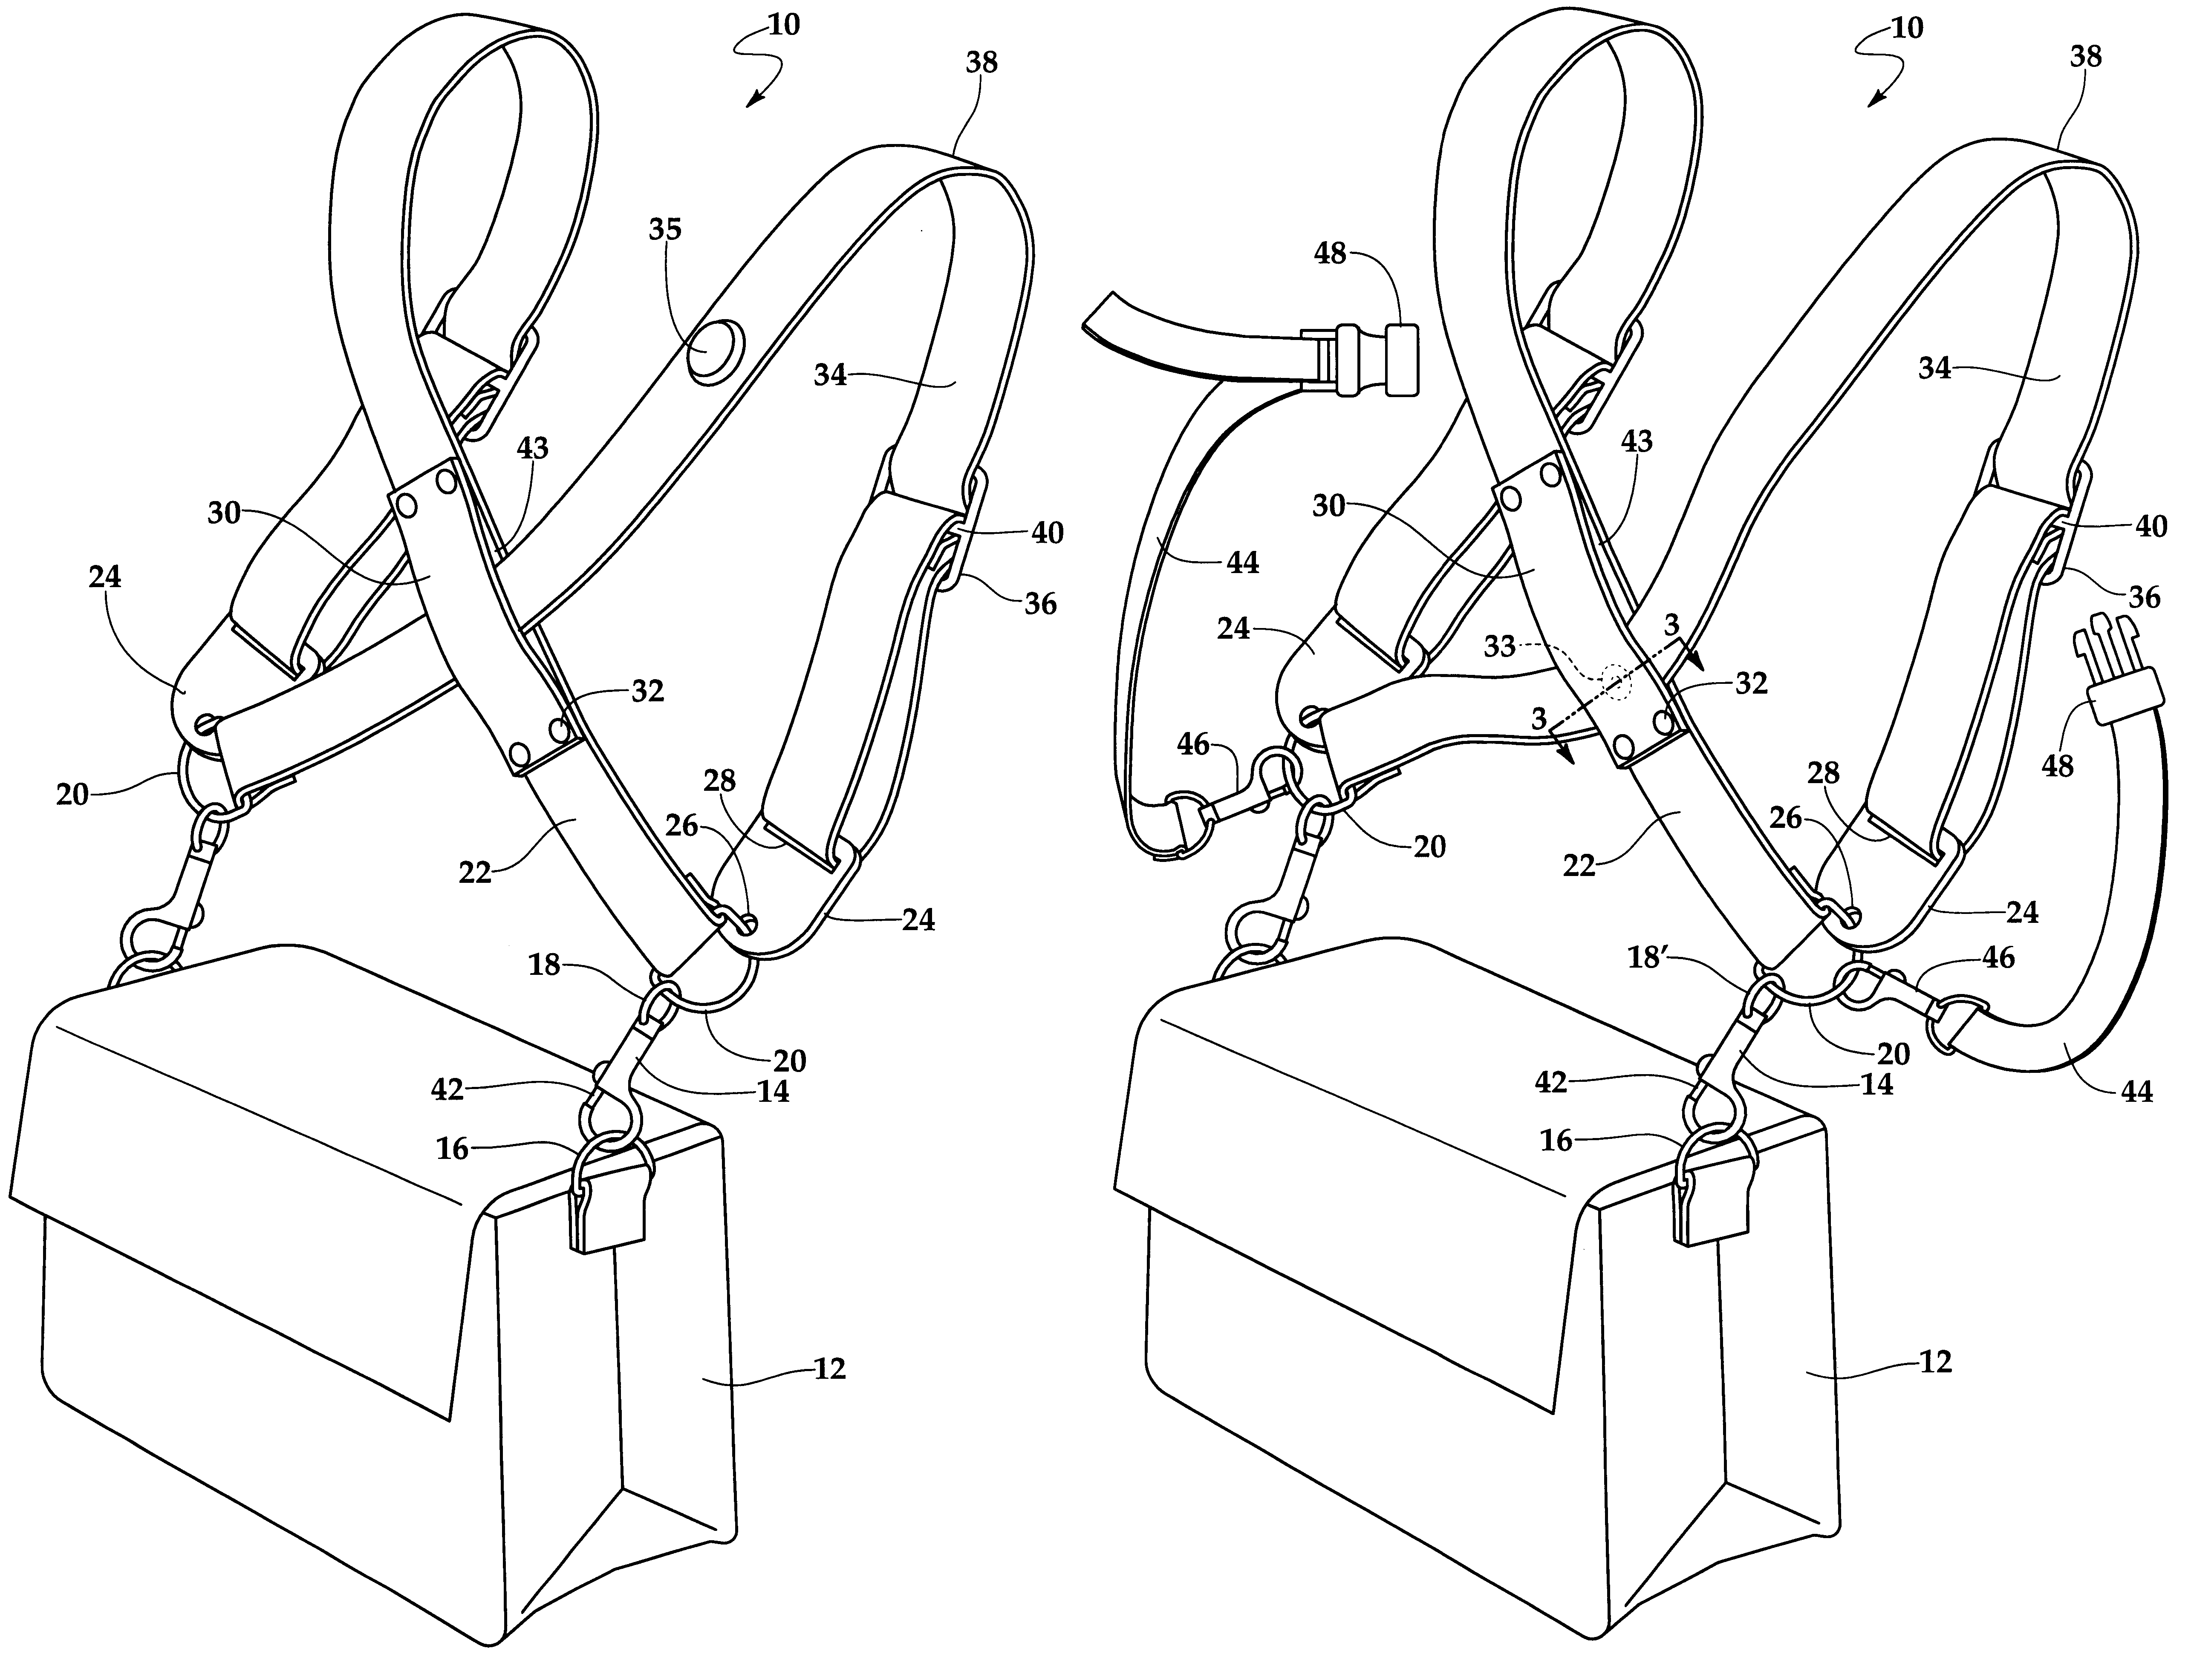 Dual strap system for conversion of bags to backpacks